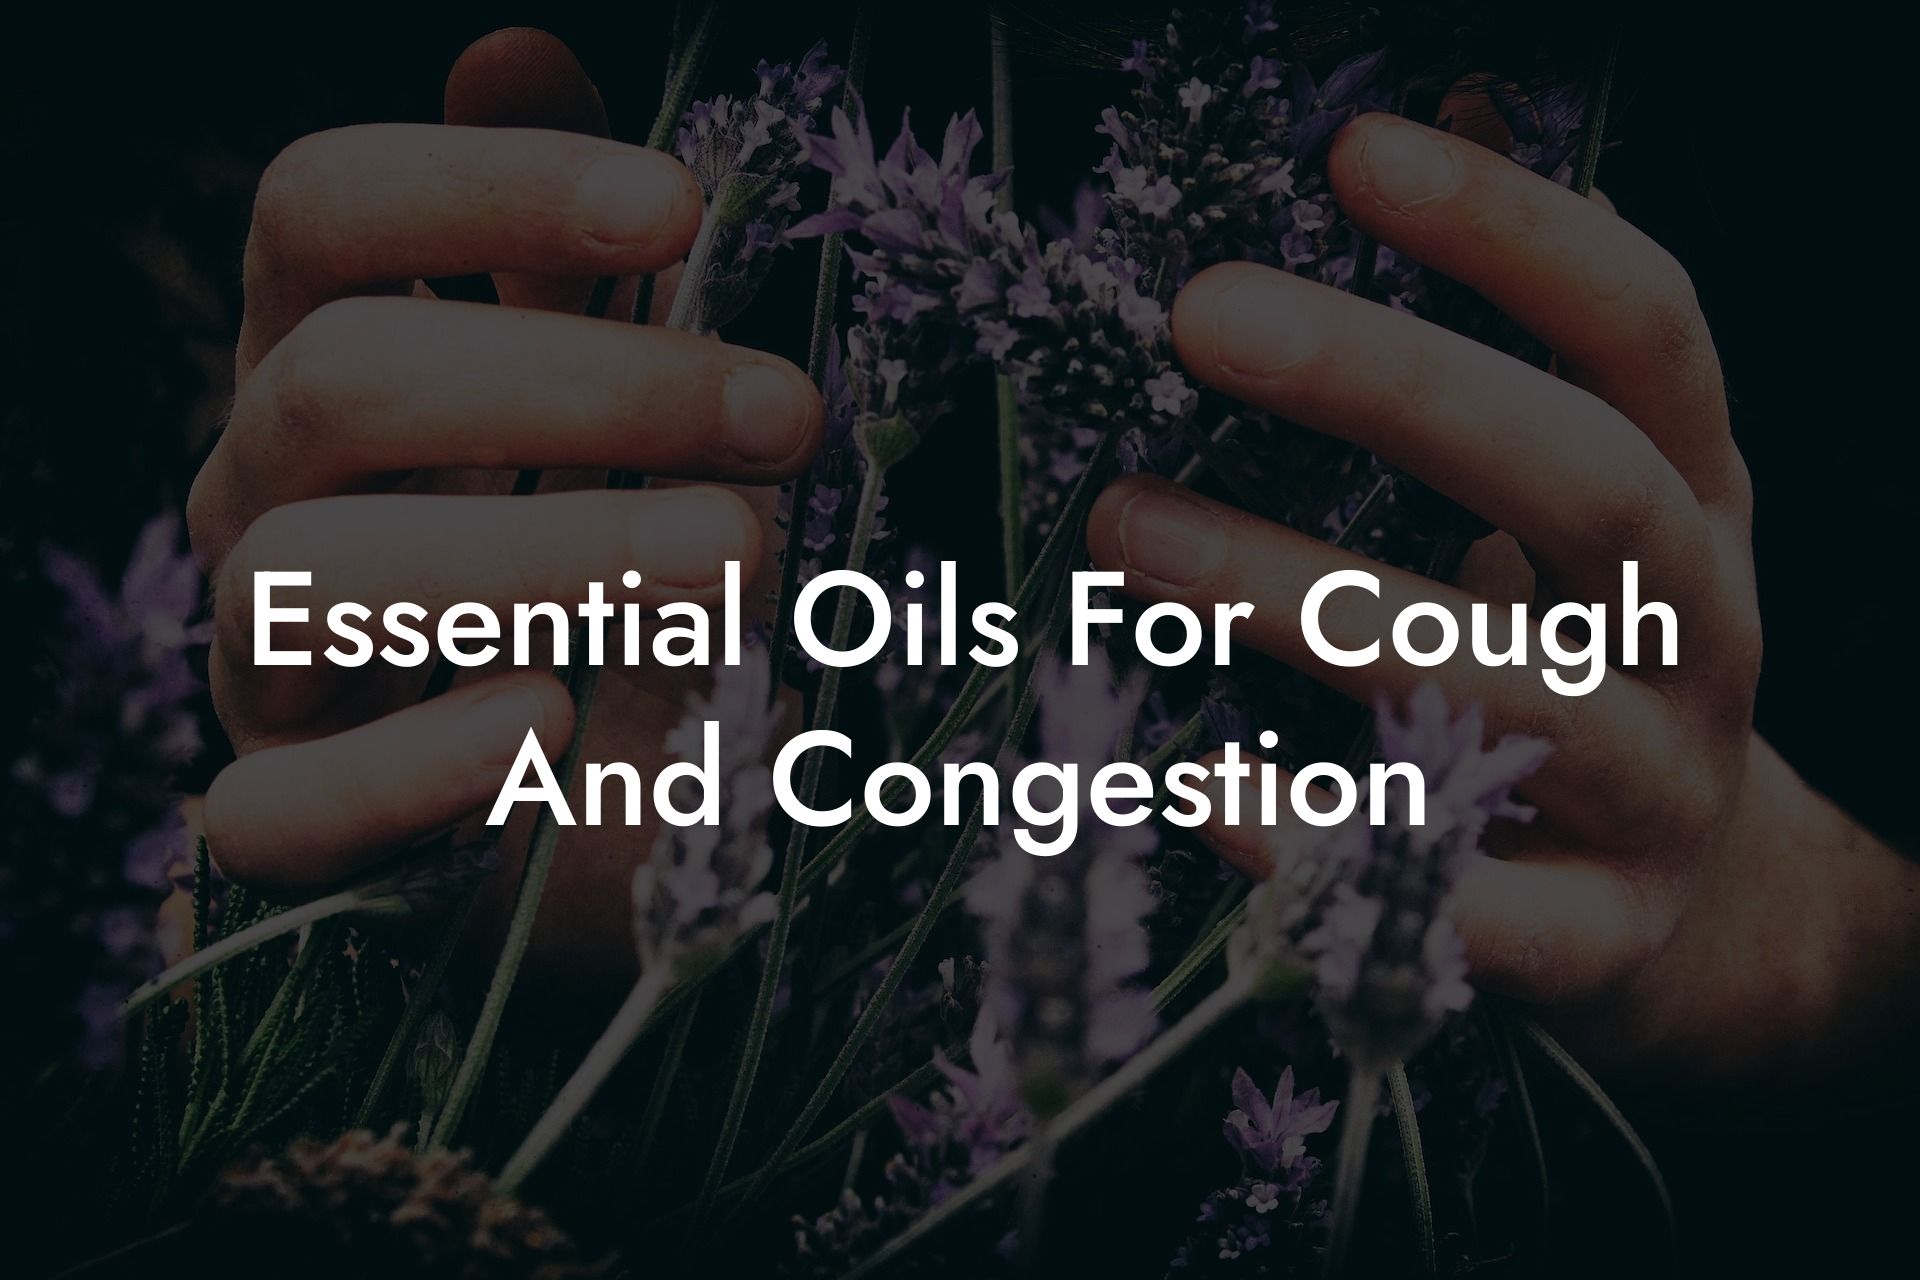 Essential Oils For Cough And Congestion